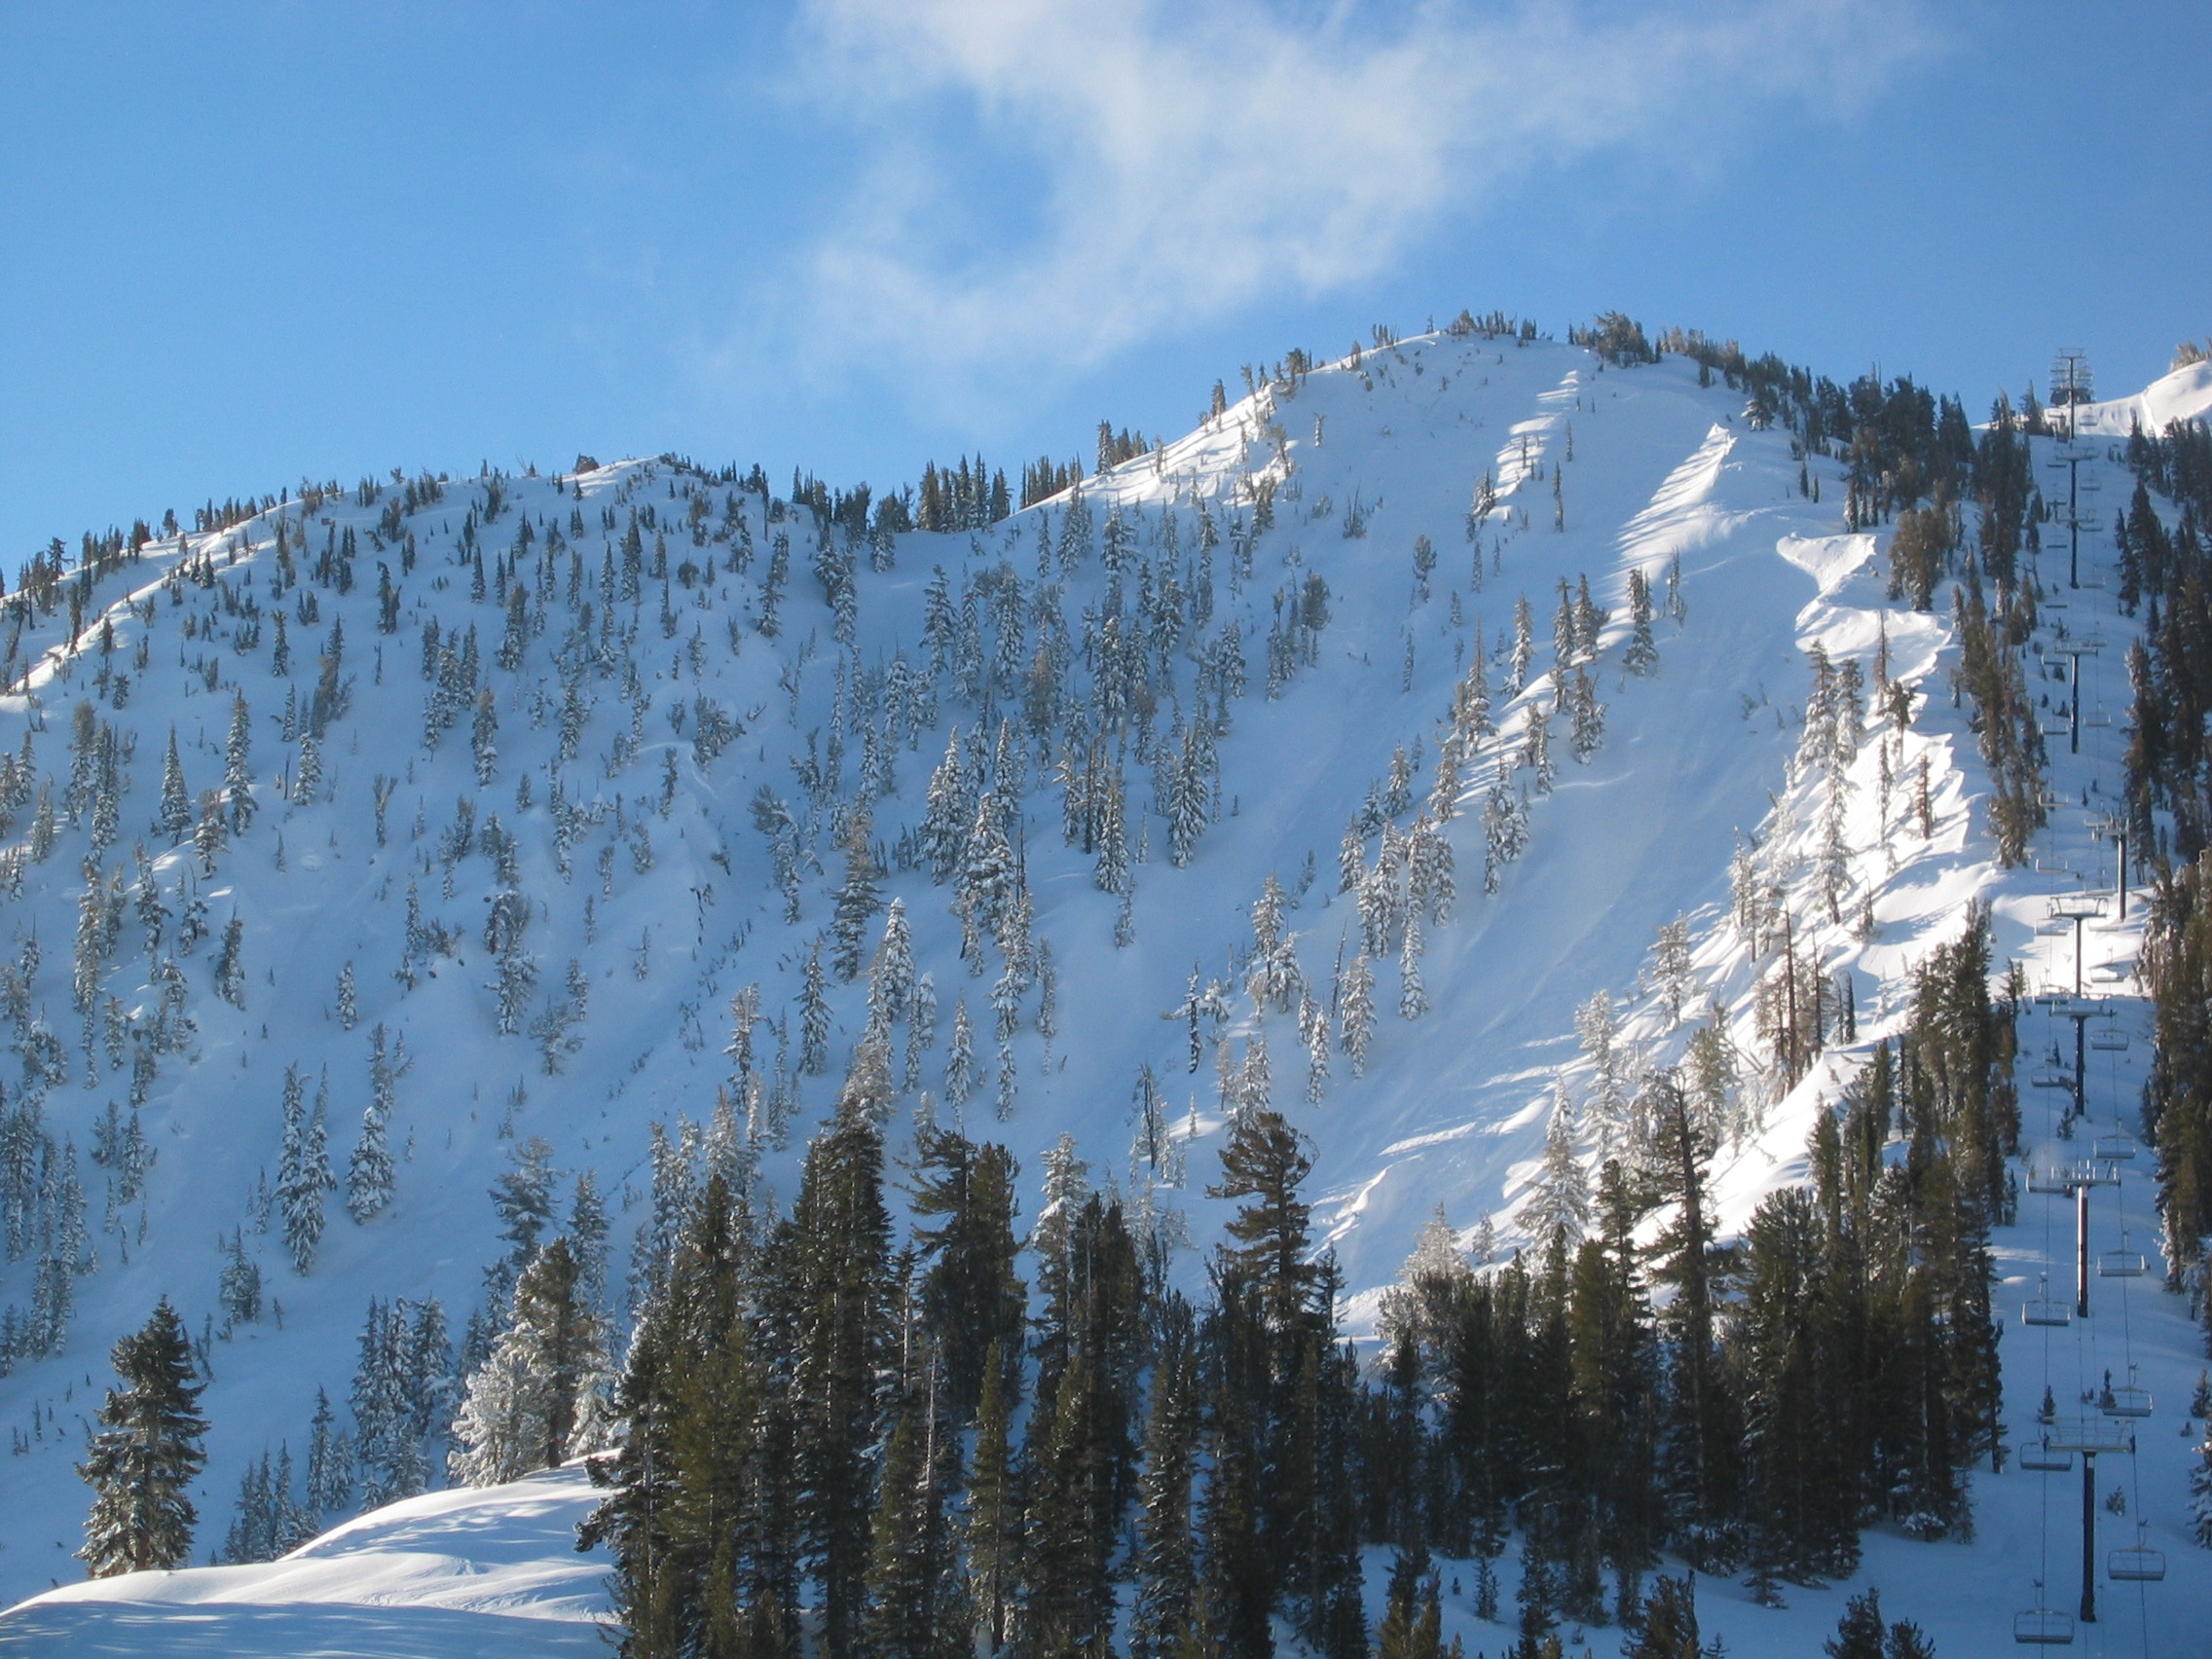 Mt. Rose ski area's famous chutes in the morning light.